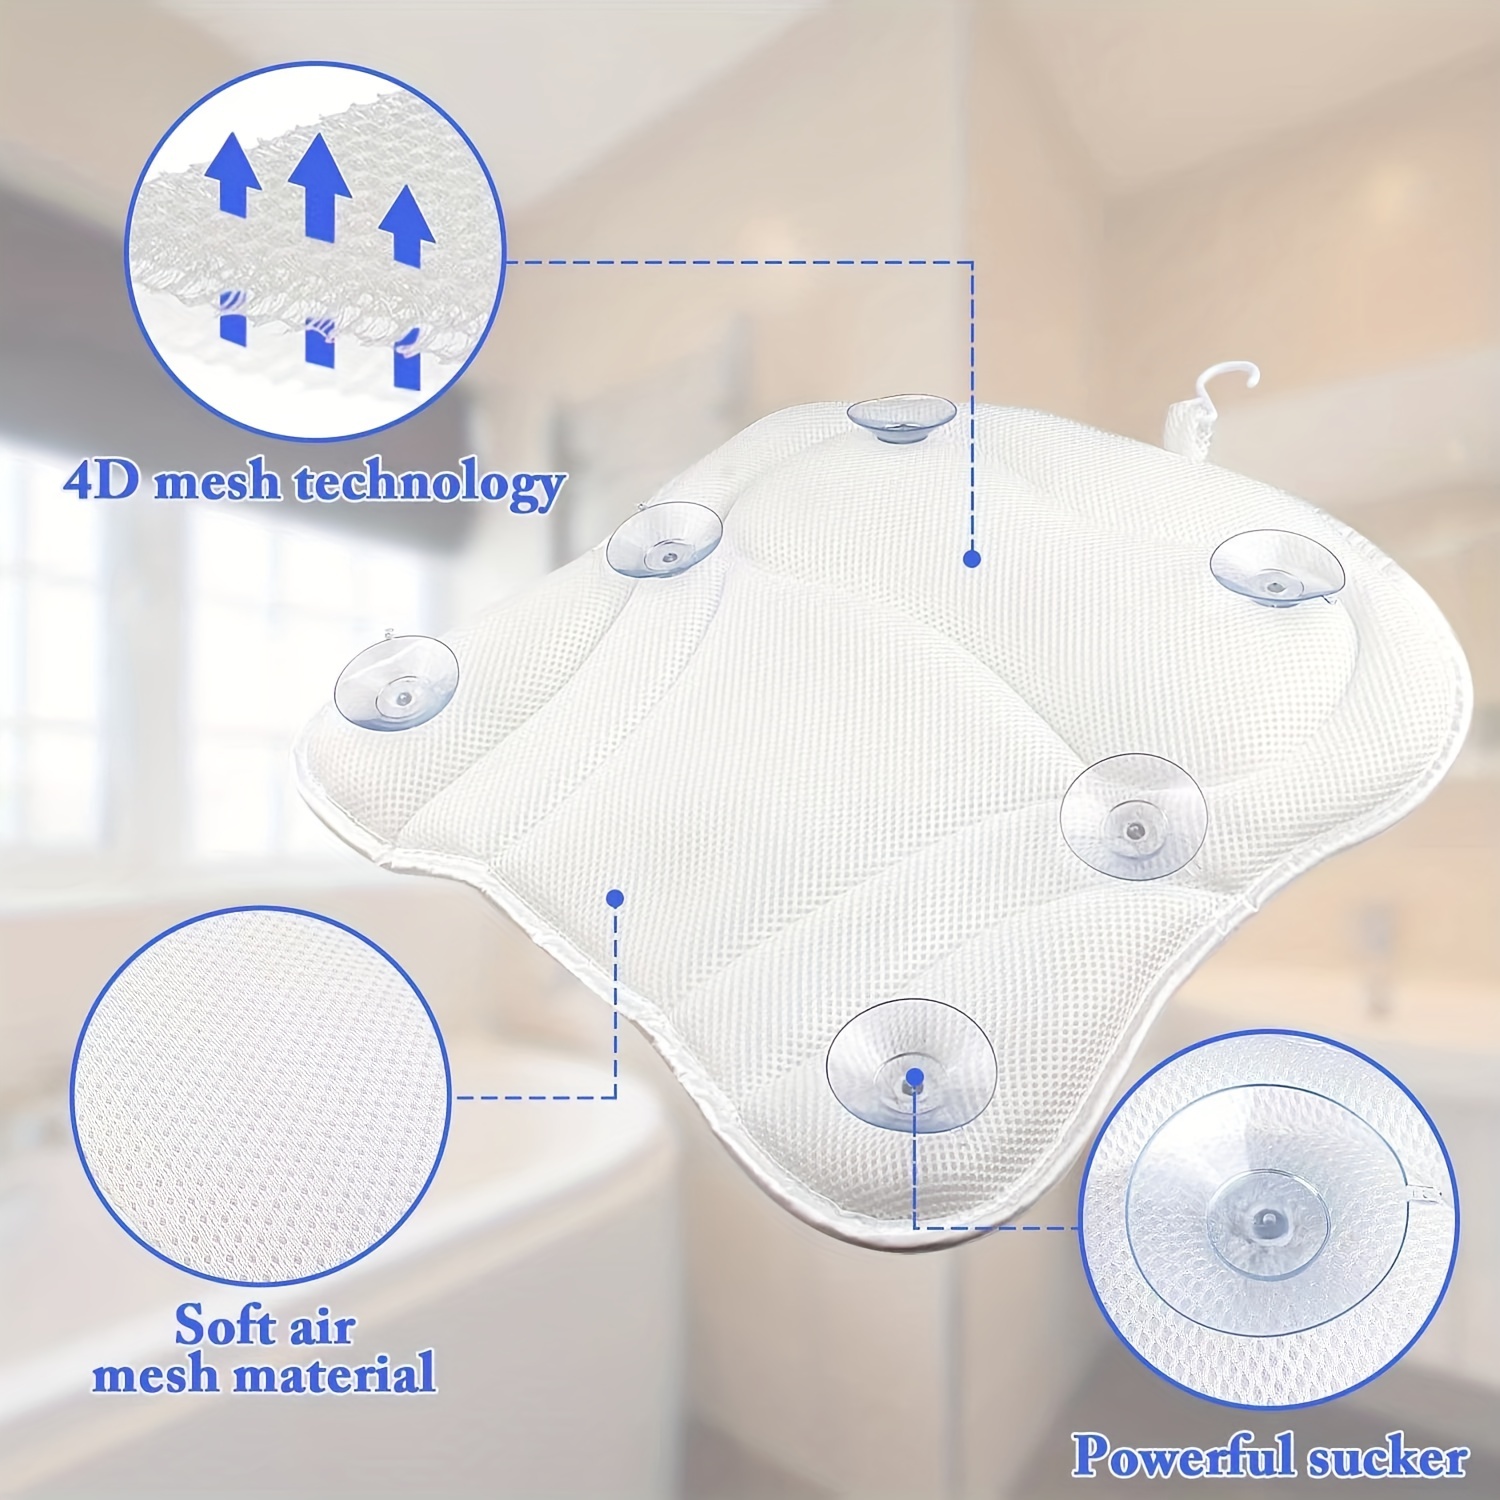 Suosittu Bath Pillow for Tub, Bathtub Spa Hot Tub Pillow with 4D Air Mesh  and 6 Non-Slip Suction Cups, Shower Headrest Pillow with Ergonomic Neck  Shoulder Back Support for Jacuzzi All Bathtub 